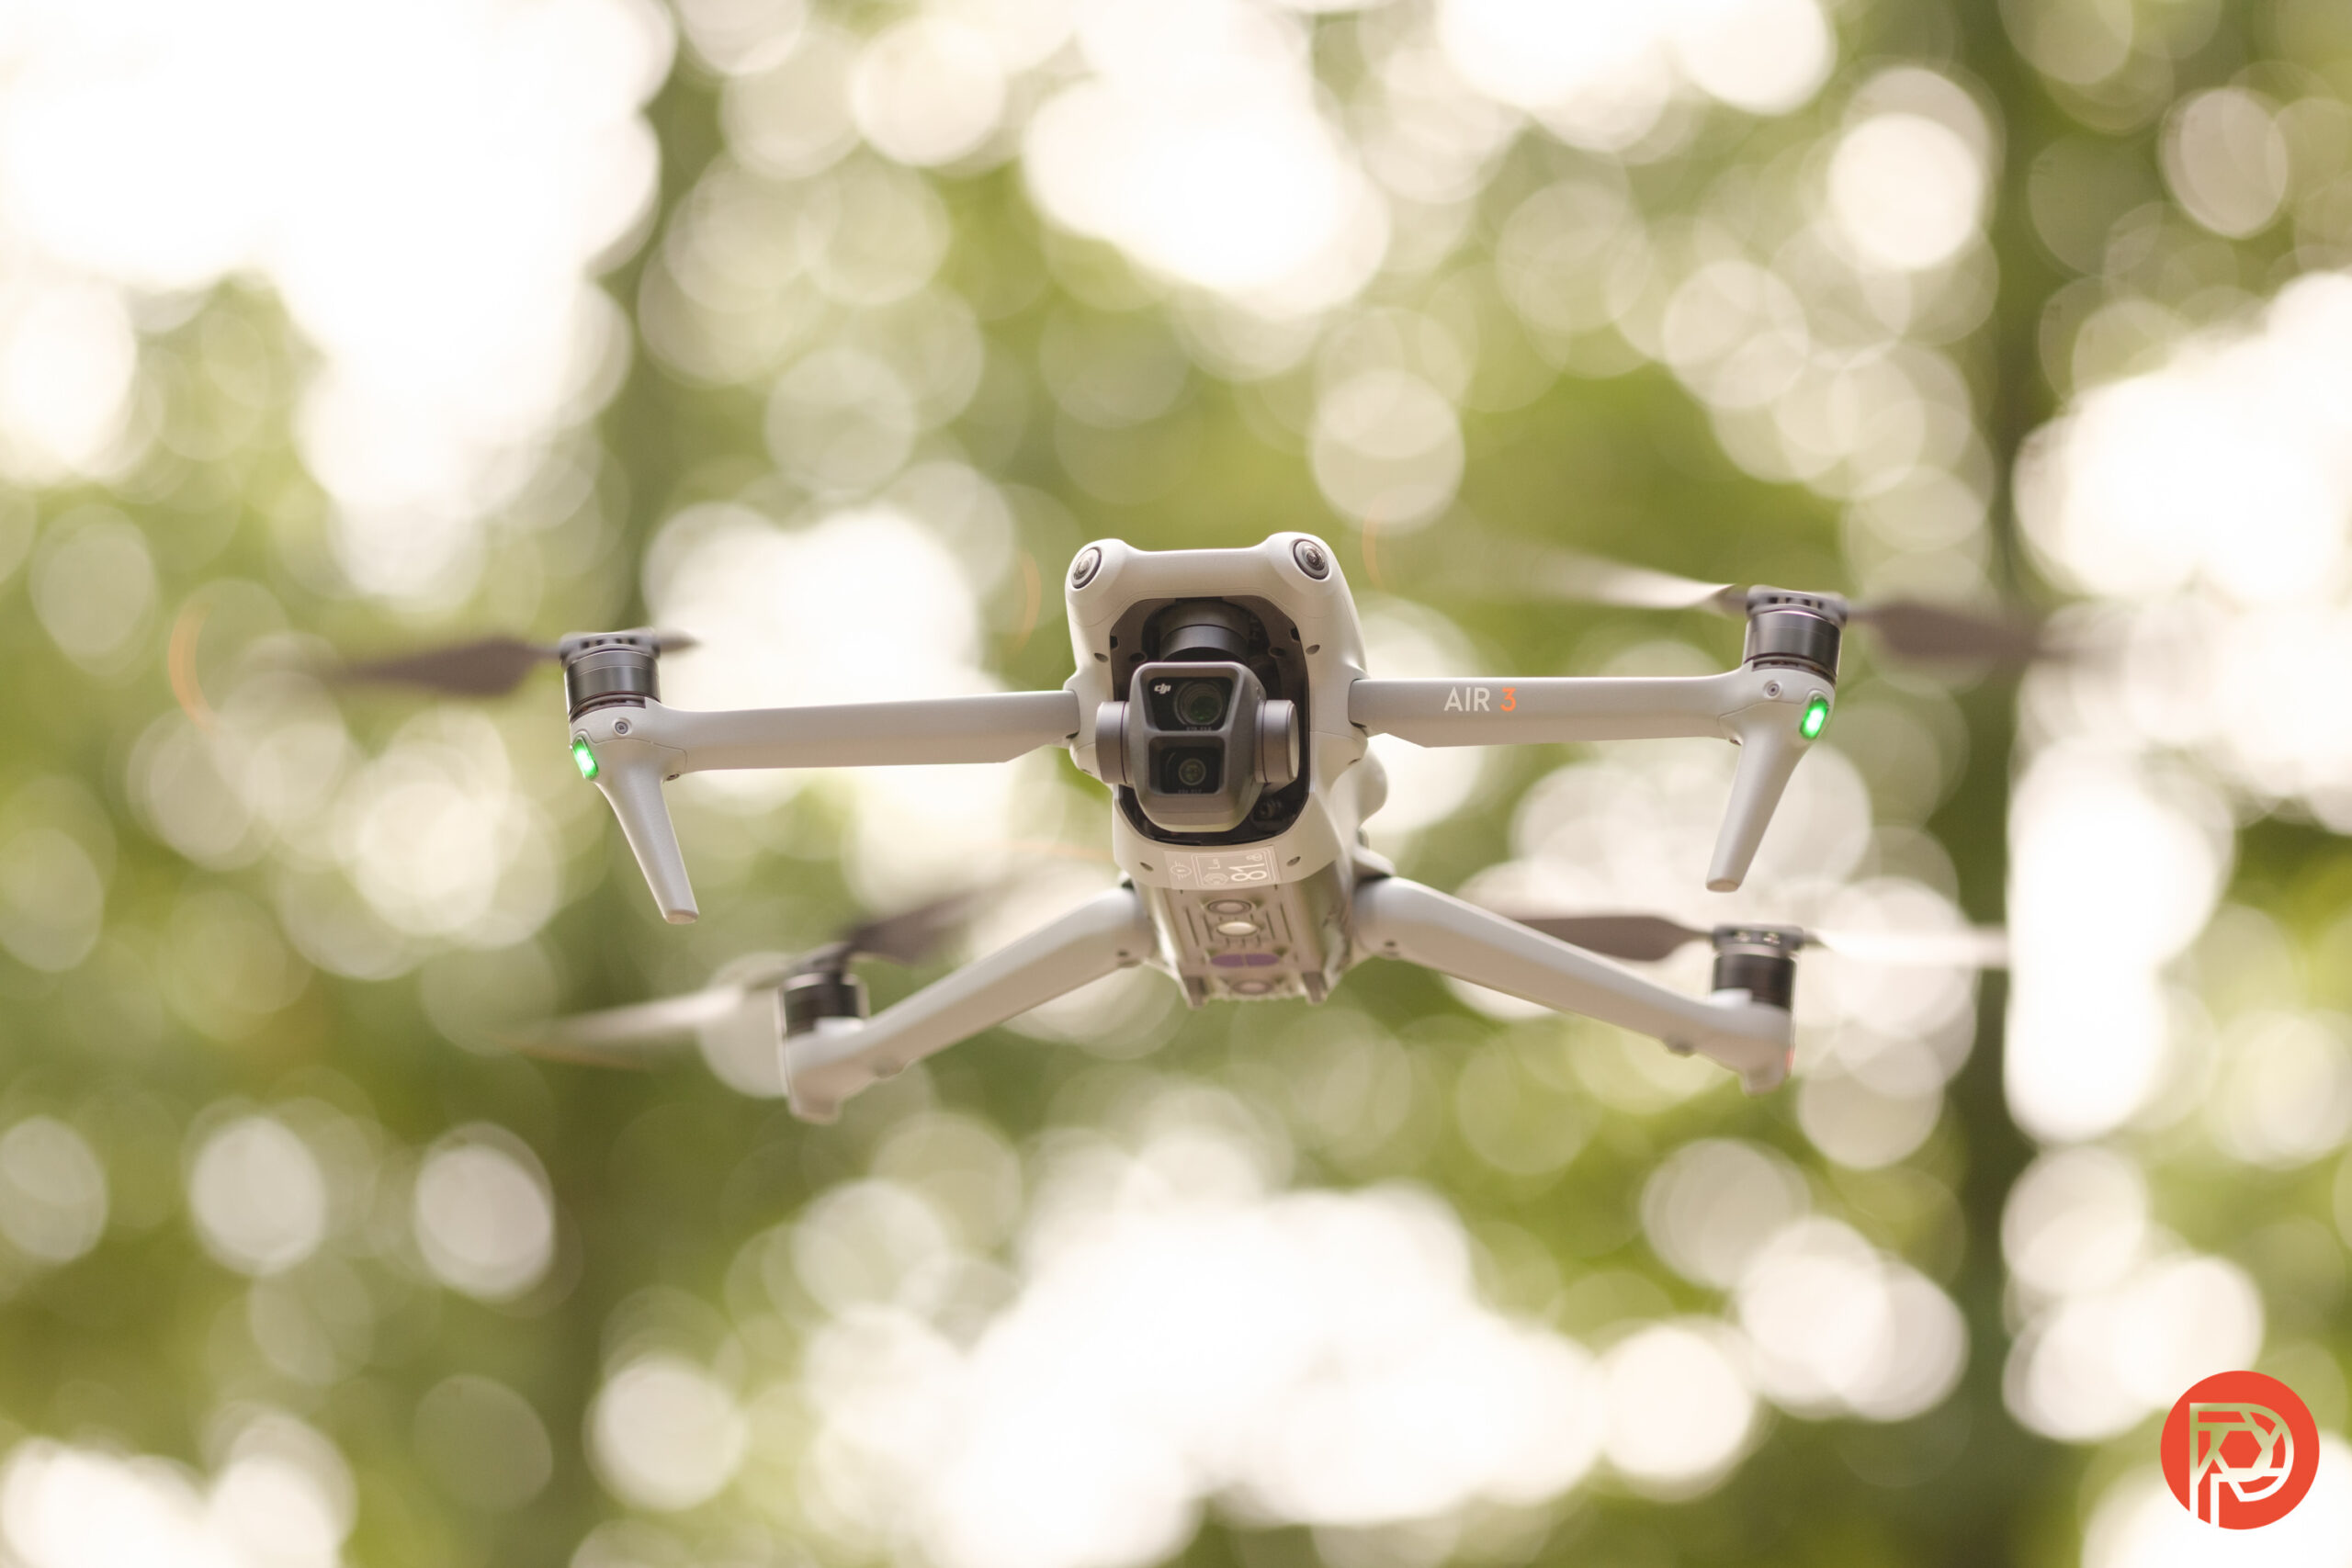 DJI Air 3 review: Make mine a double